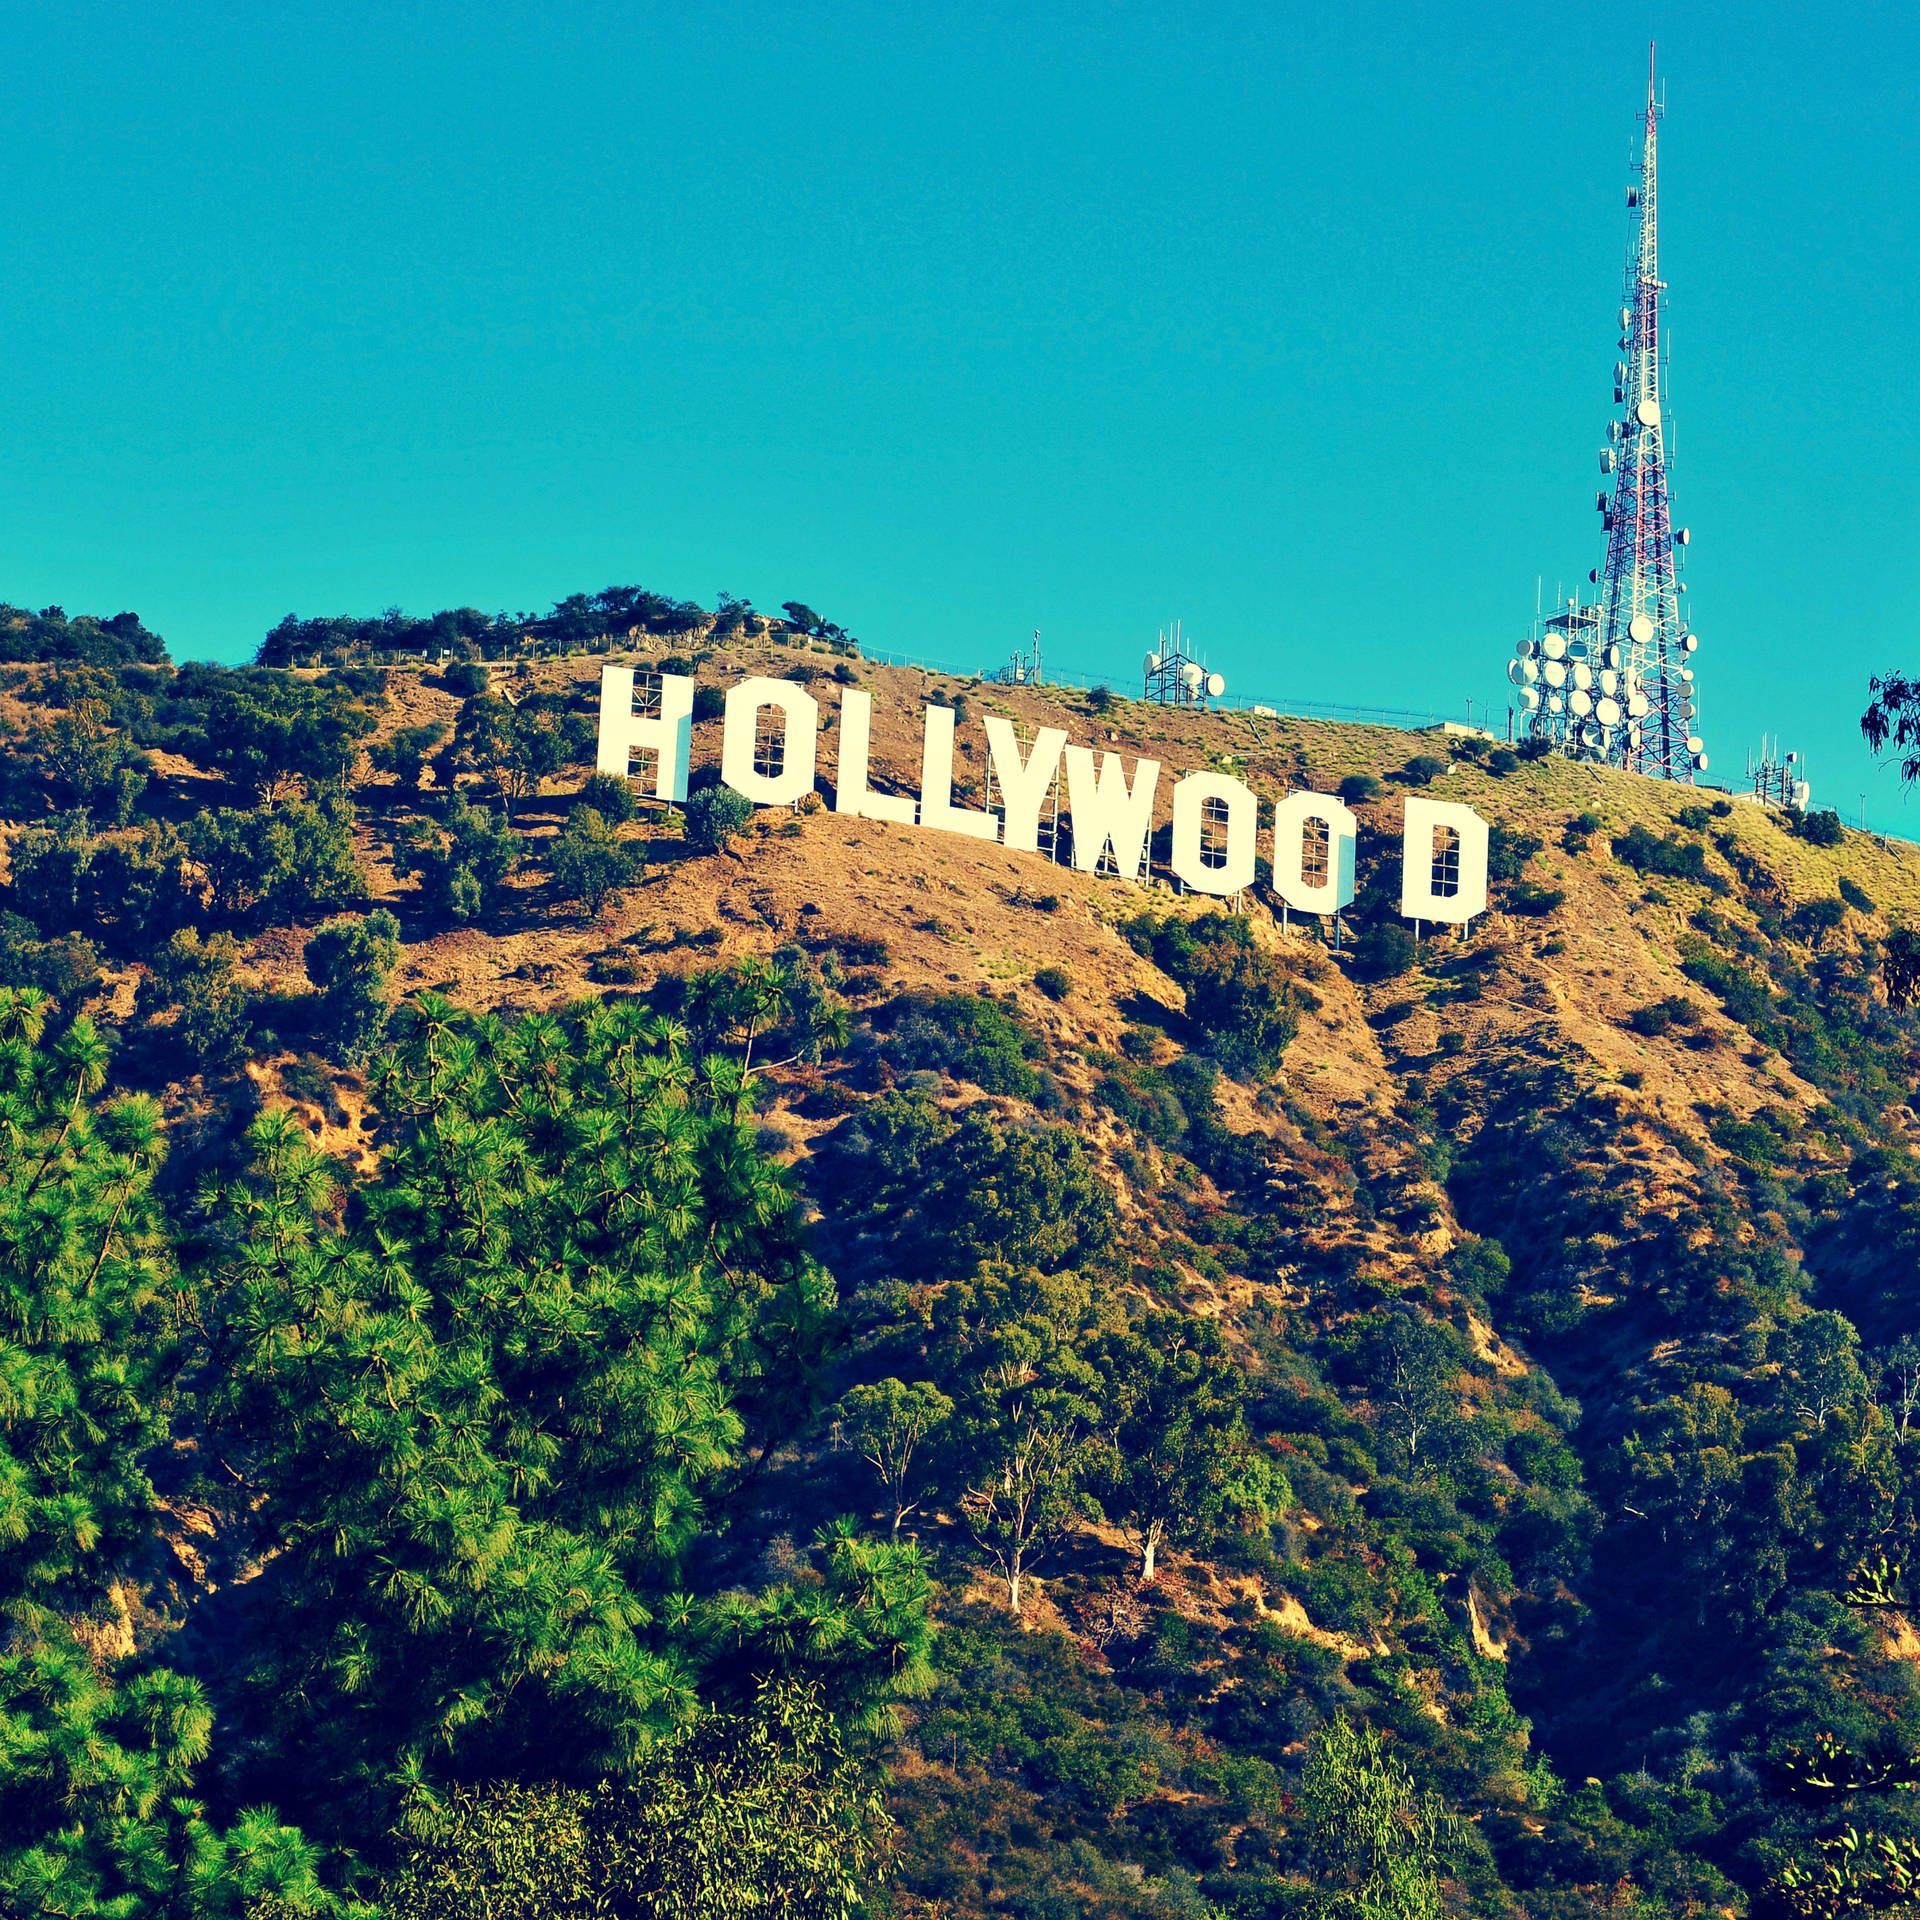  Hollywood Hintergrundbild 1920x1920. Download Hollywood Sign Aesthetic Square Wallpaper